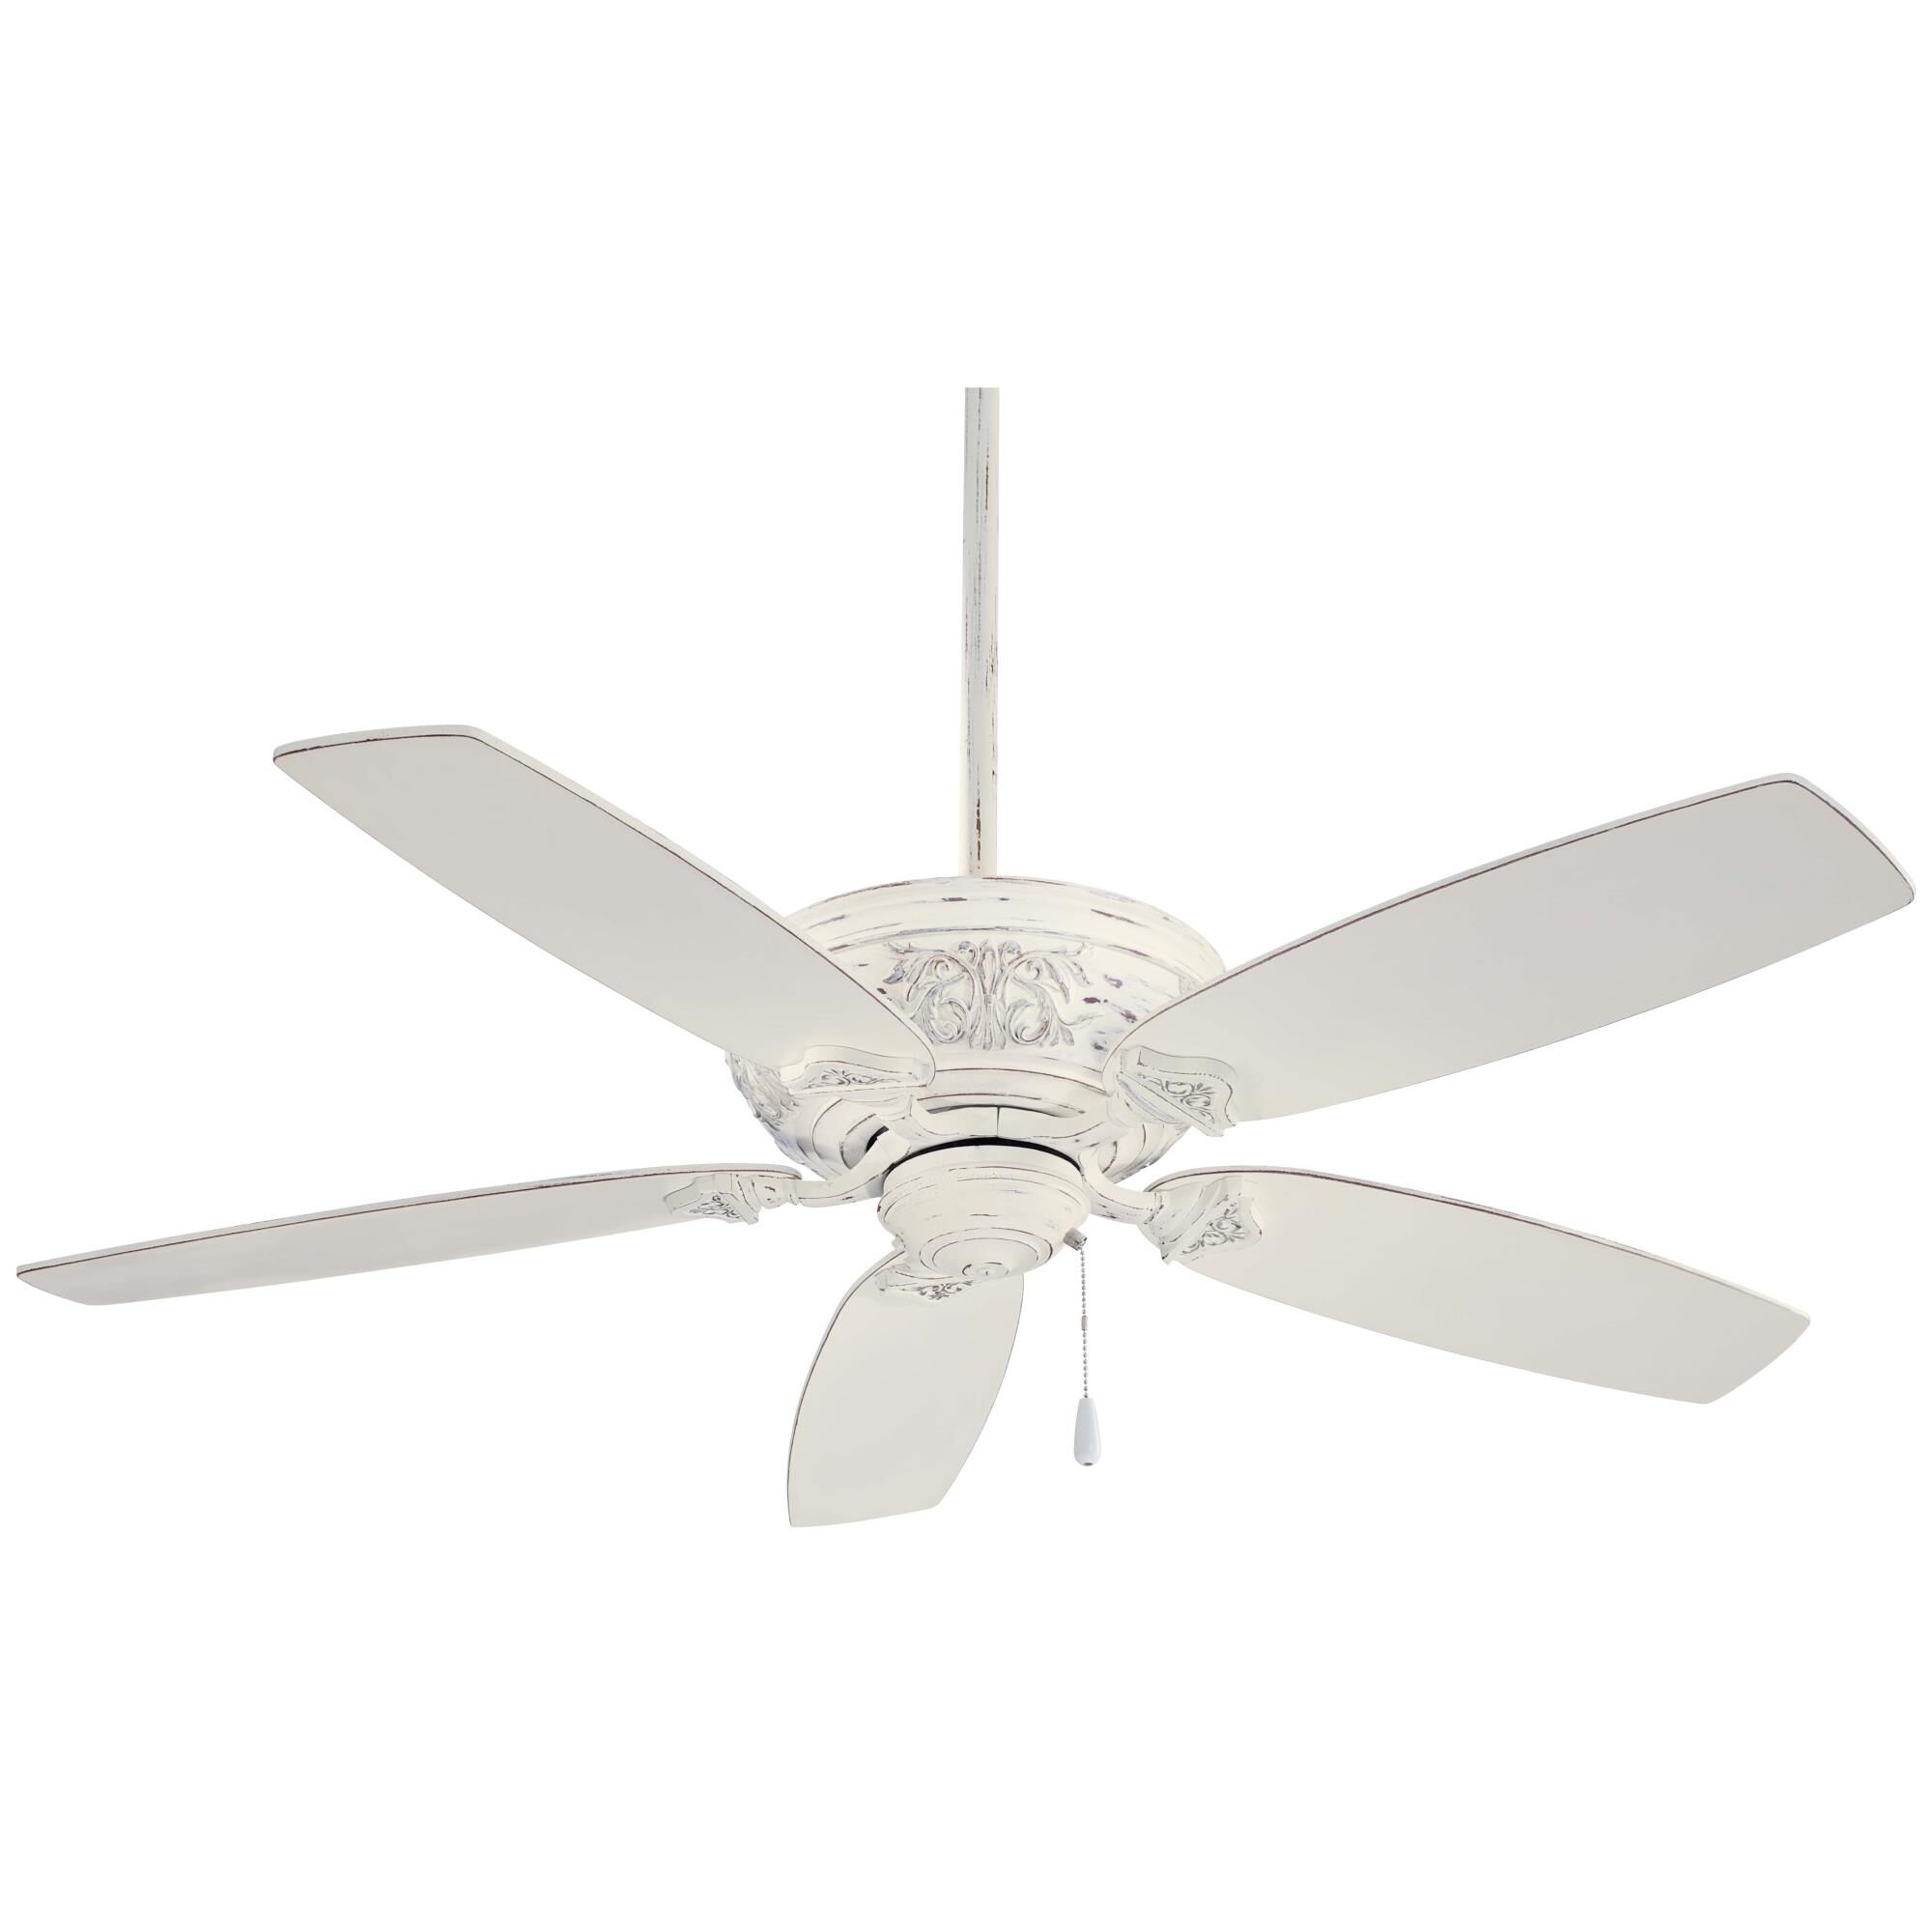 Photos - Fan Minka Aire Classica 54 Inch Ceiling  Classica - F659-PBL - Traditional